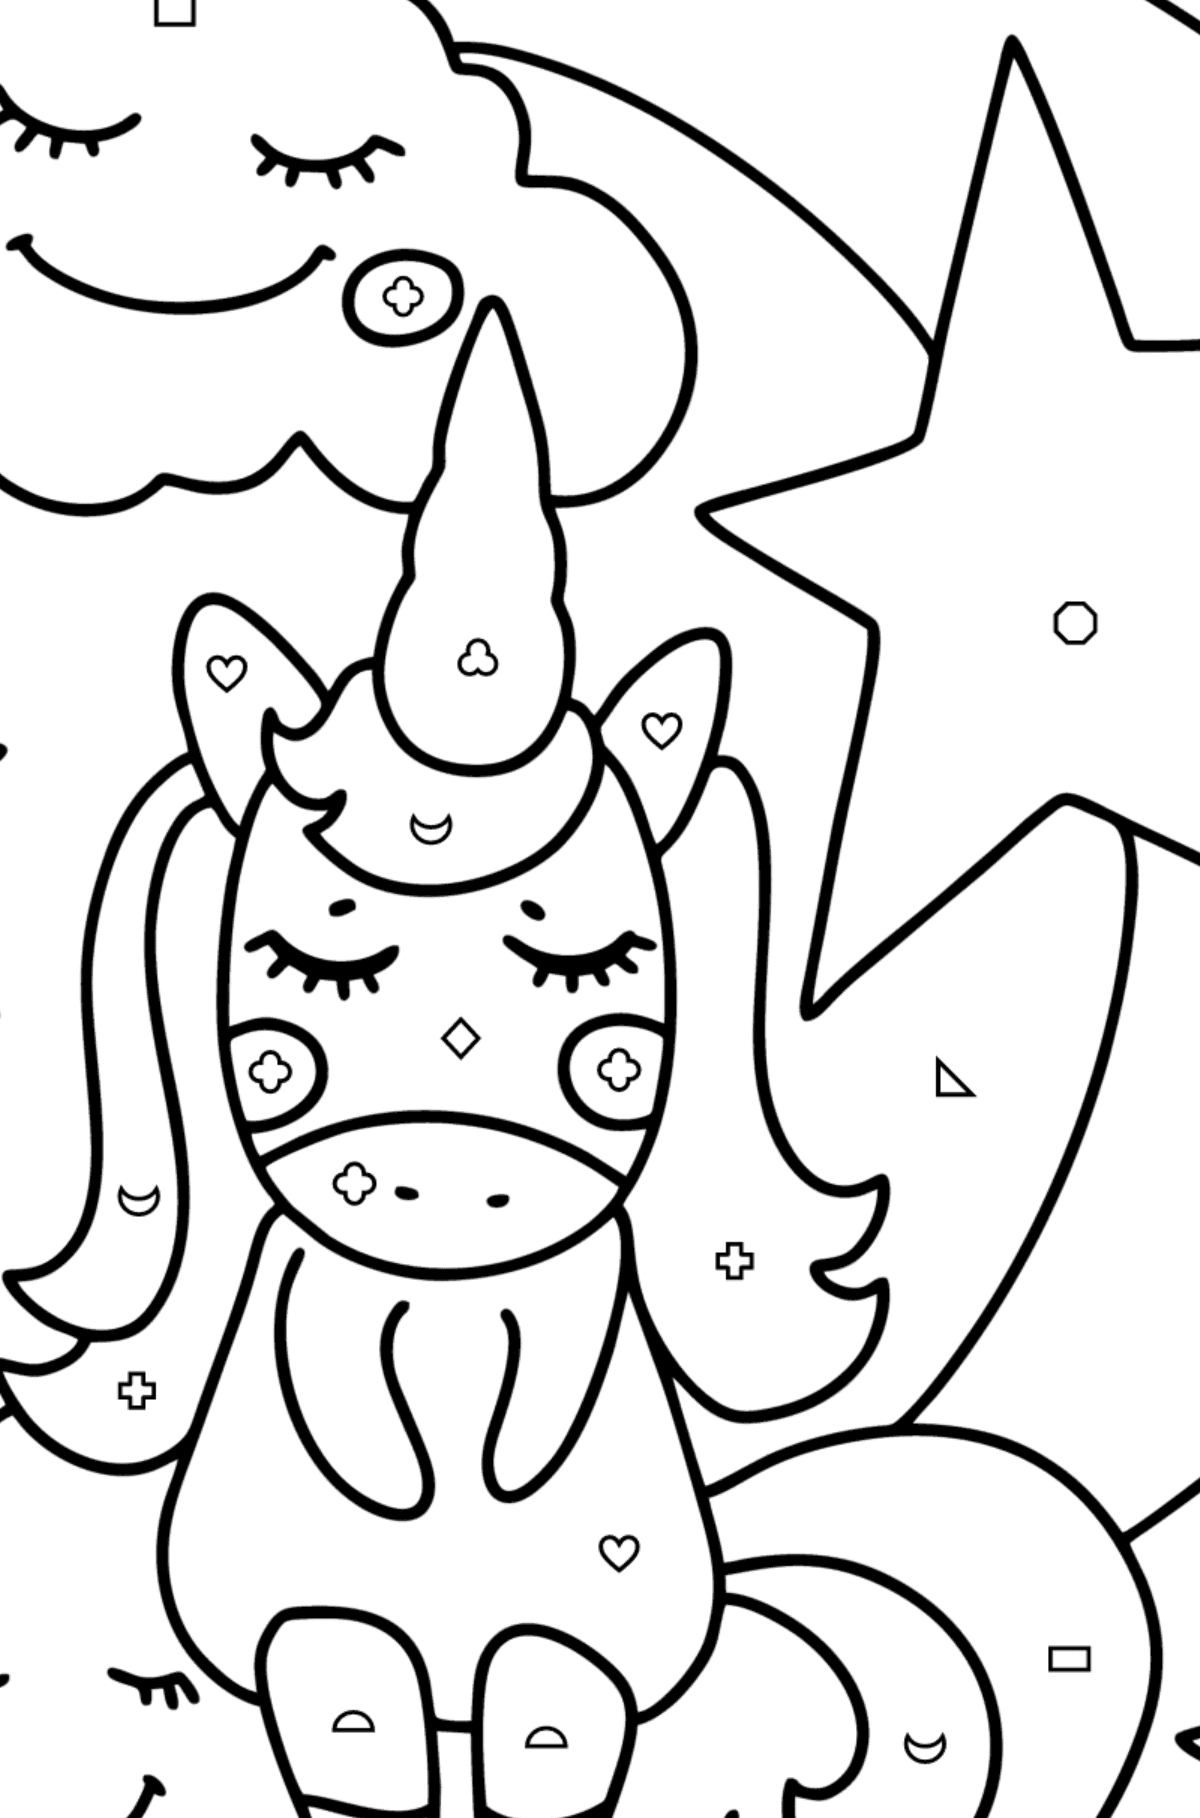 Star unicorn coloring page - Coloring by Geometric Shapes for Kids